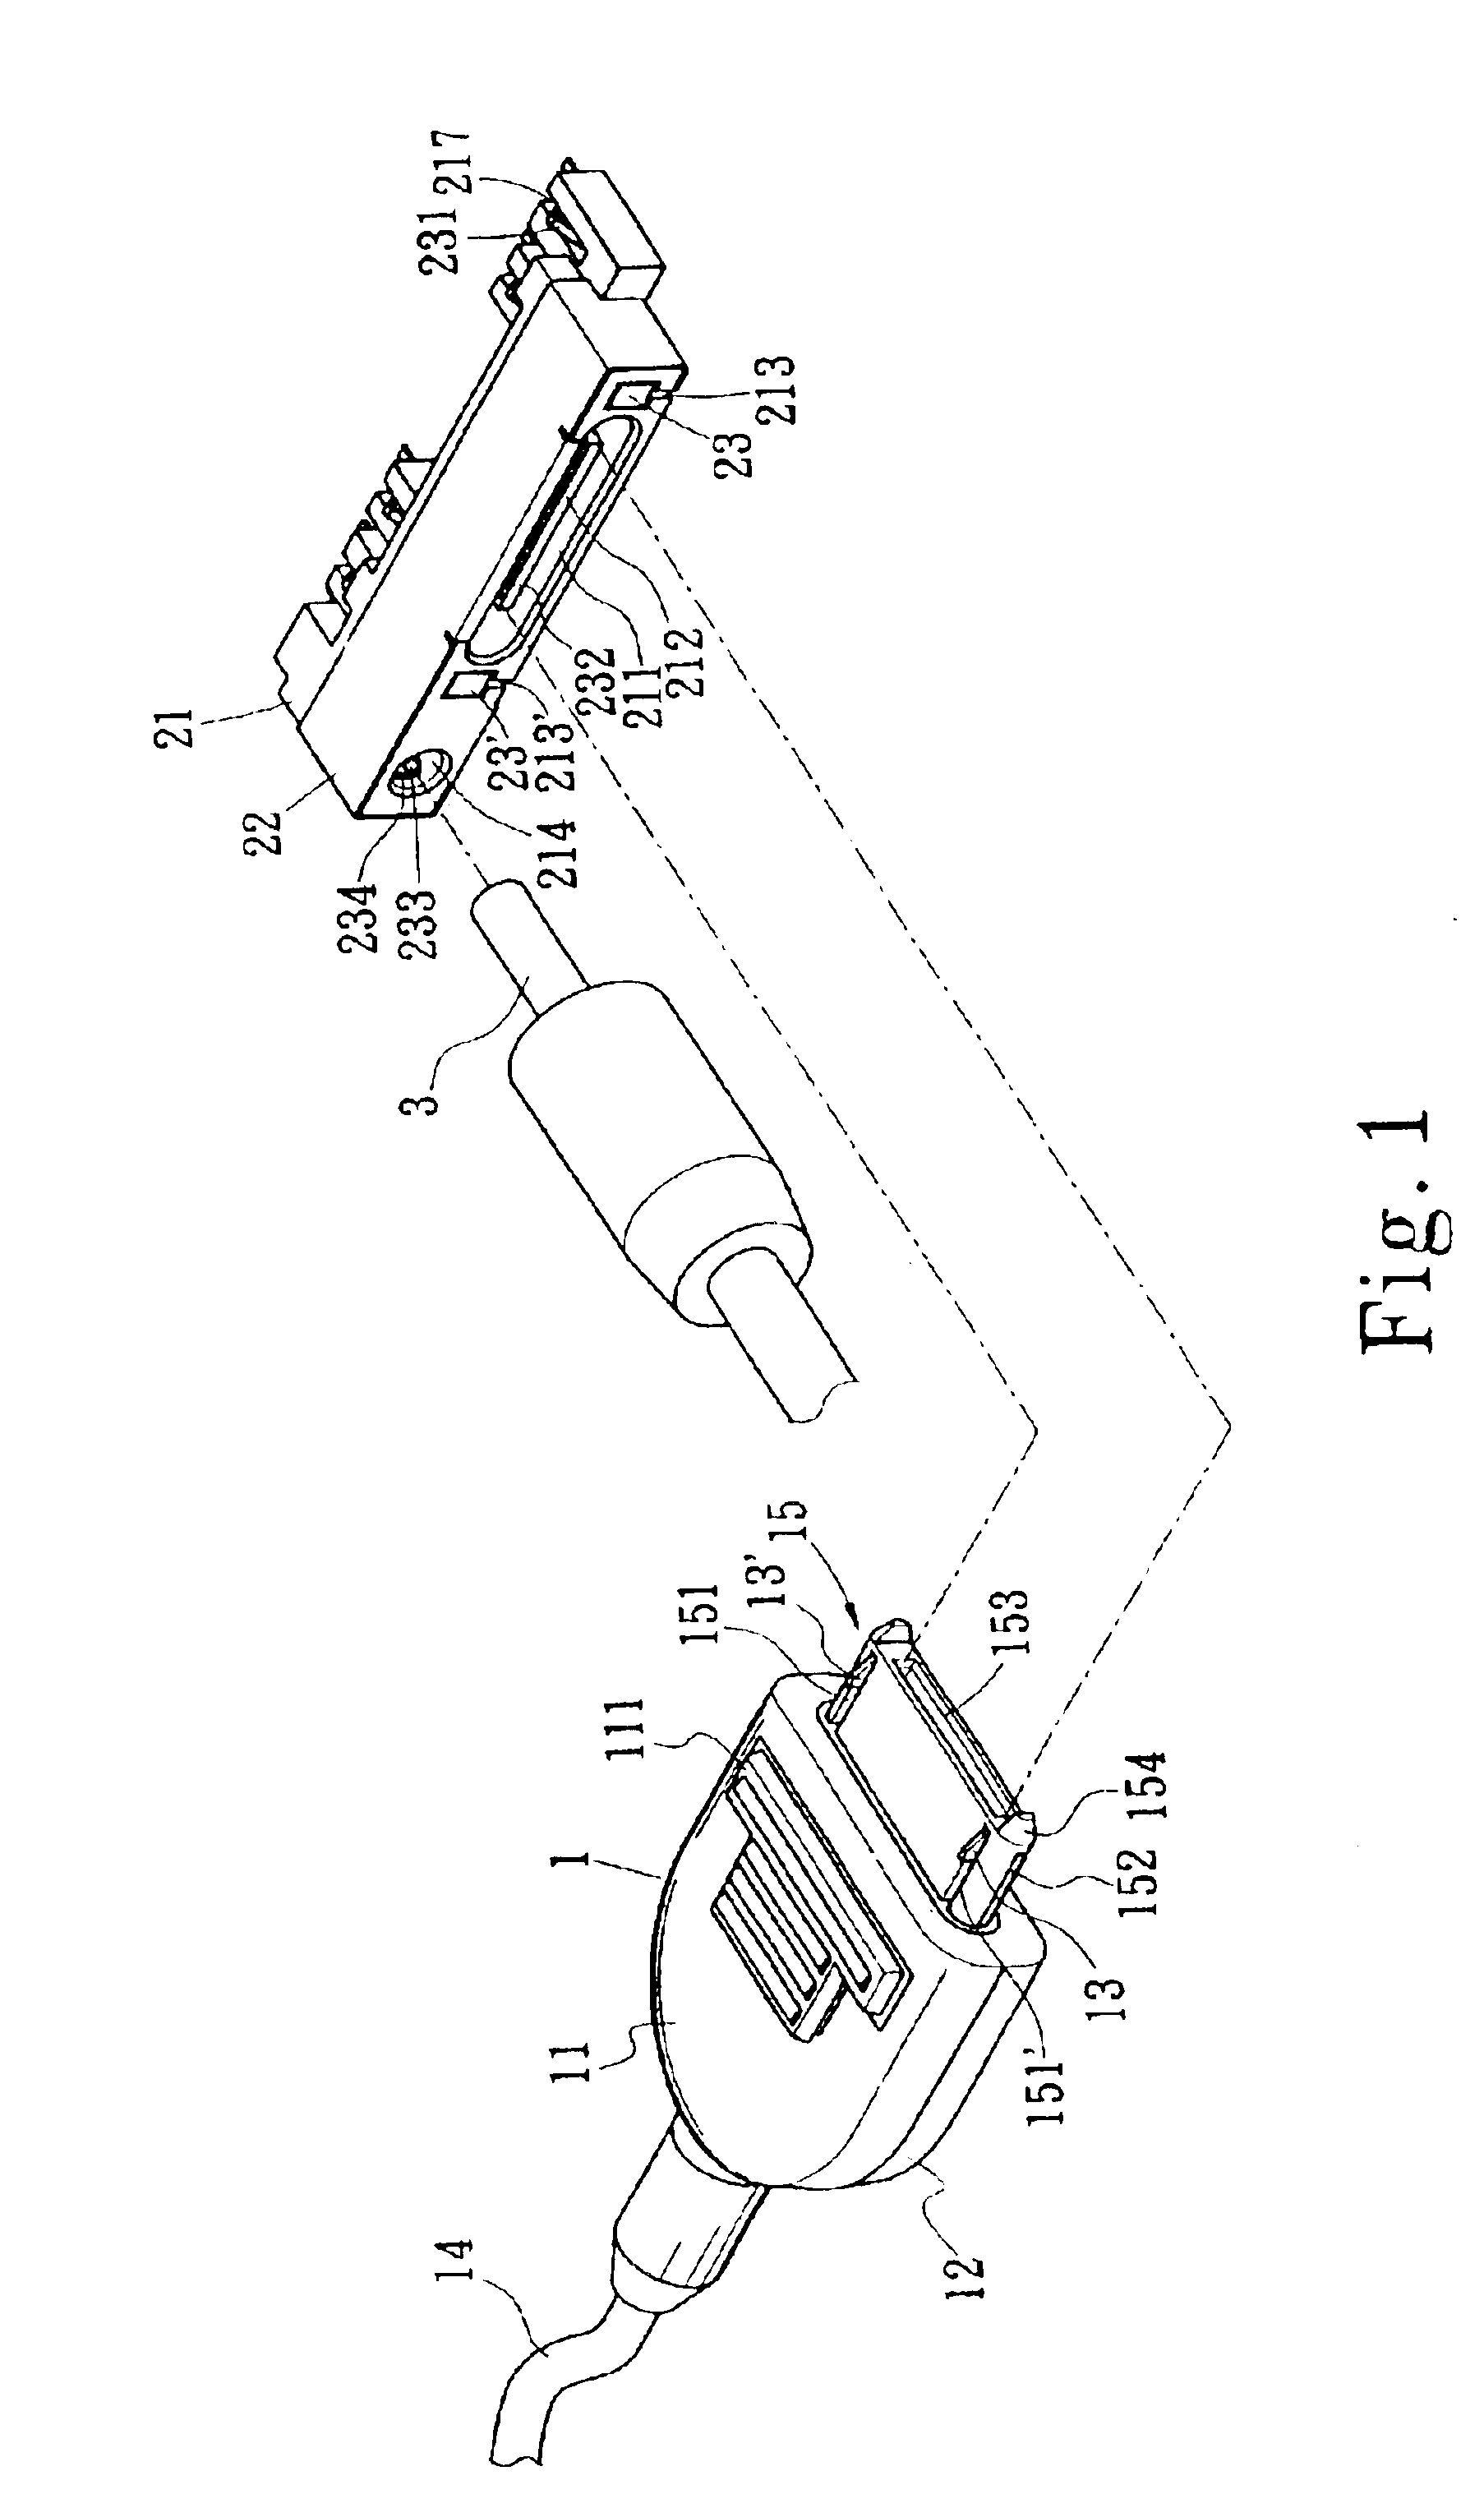 Electrical connector assembly structure